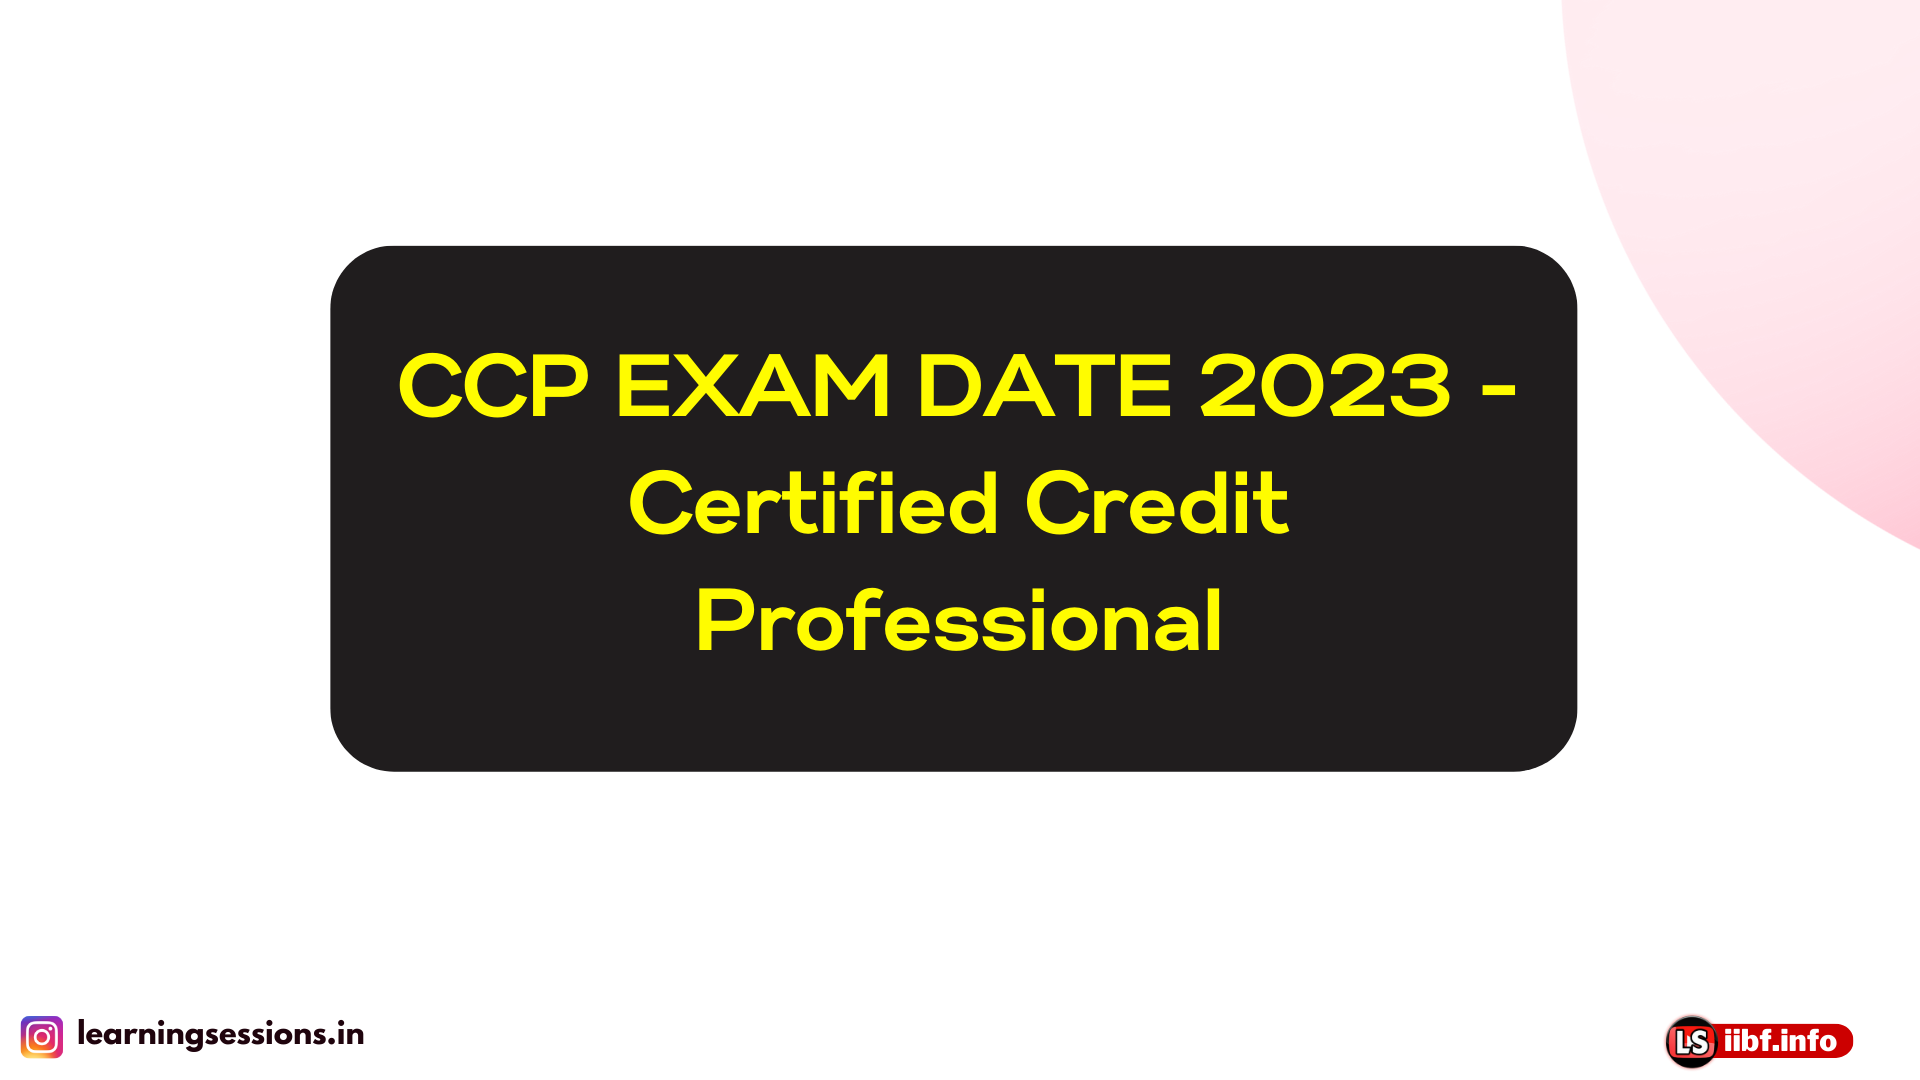 CCP EXAM DATE 2022 - Certified Credit Professional